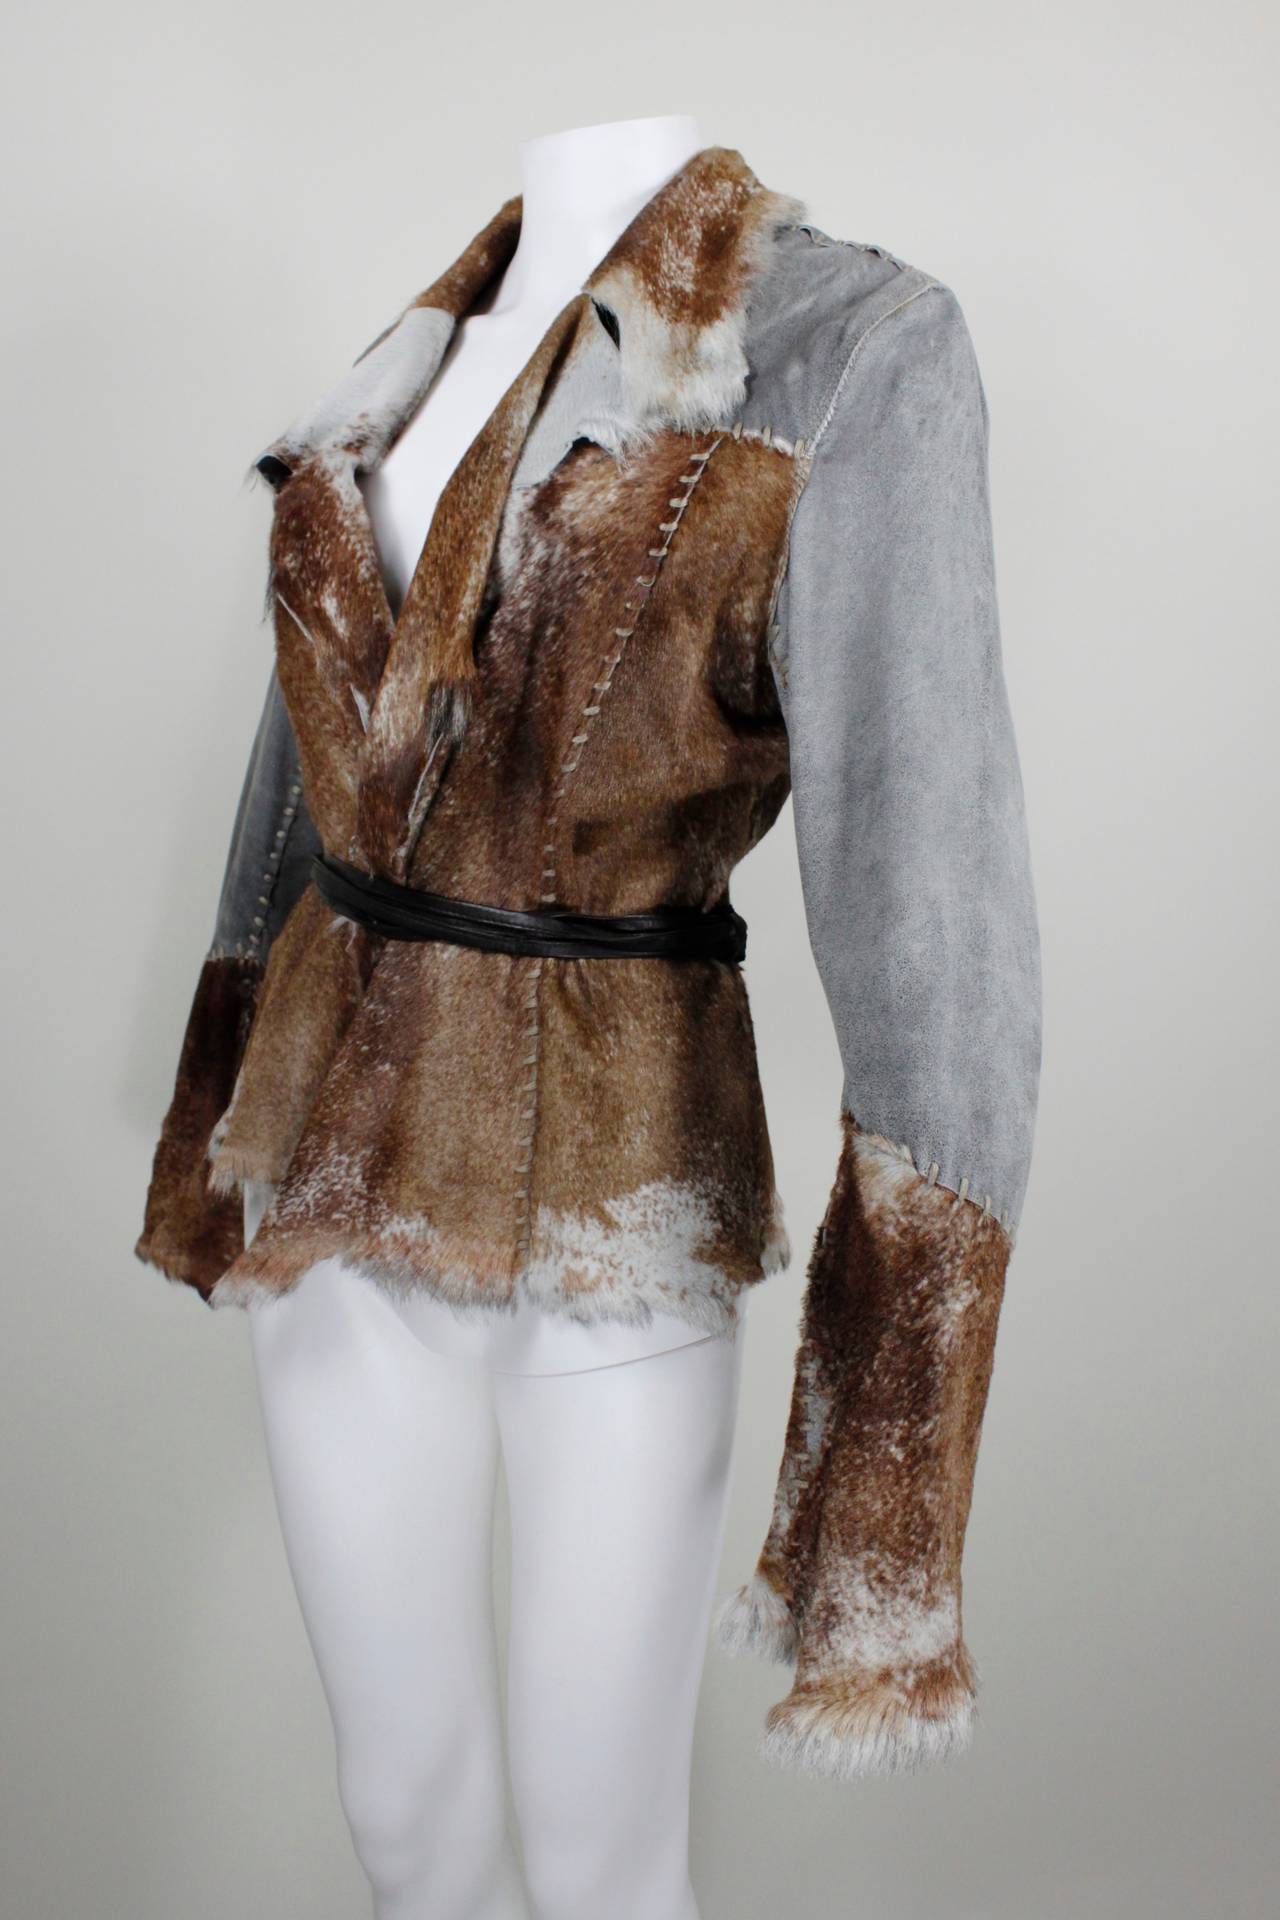 An ultra luxe, leightweight jacket from Sylvie Schimmel featuring panels of brown speckled fur and slate grey textured leather. The panels are connected with embroidered stitching. 

-Unlined
-Double bound leather cord